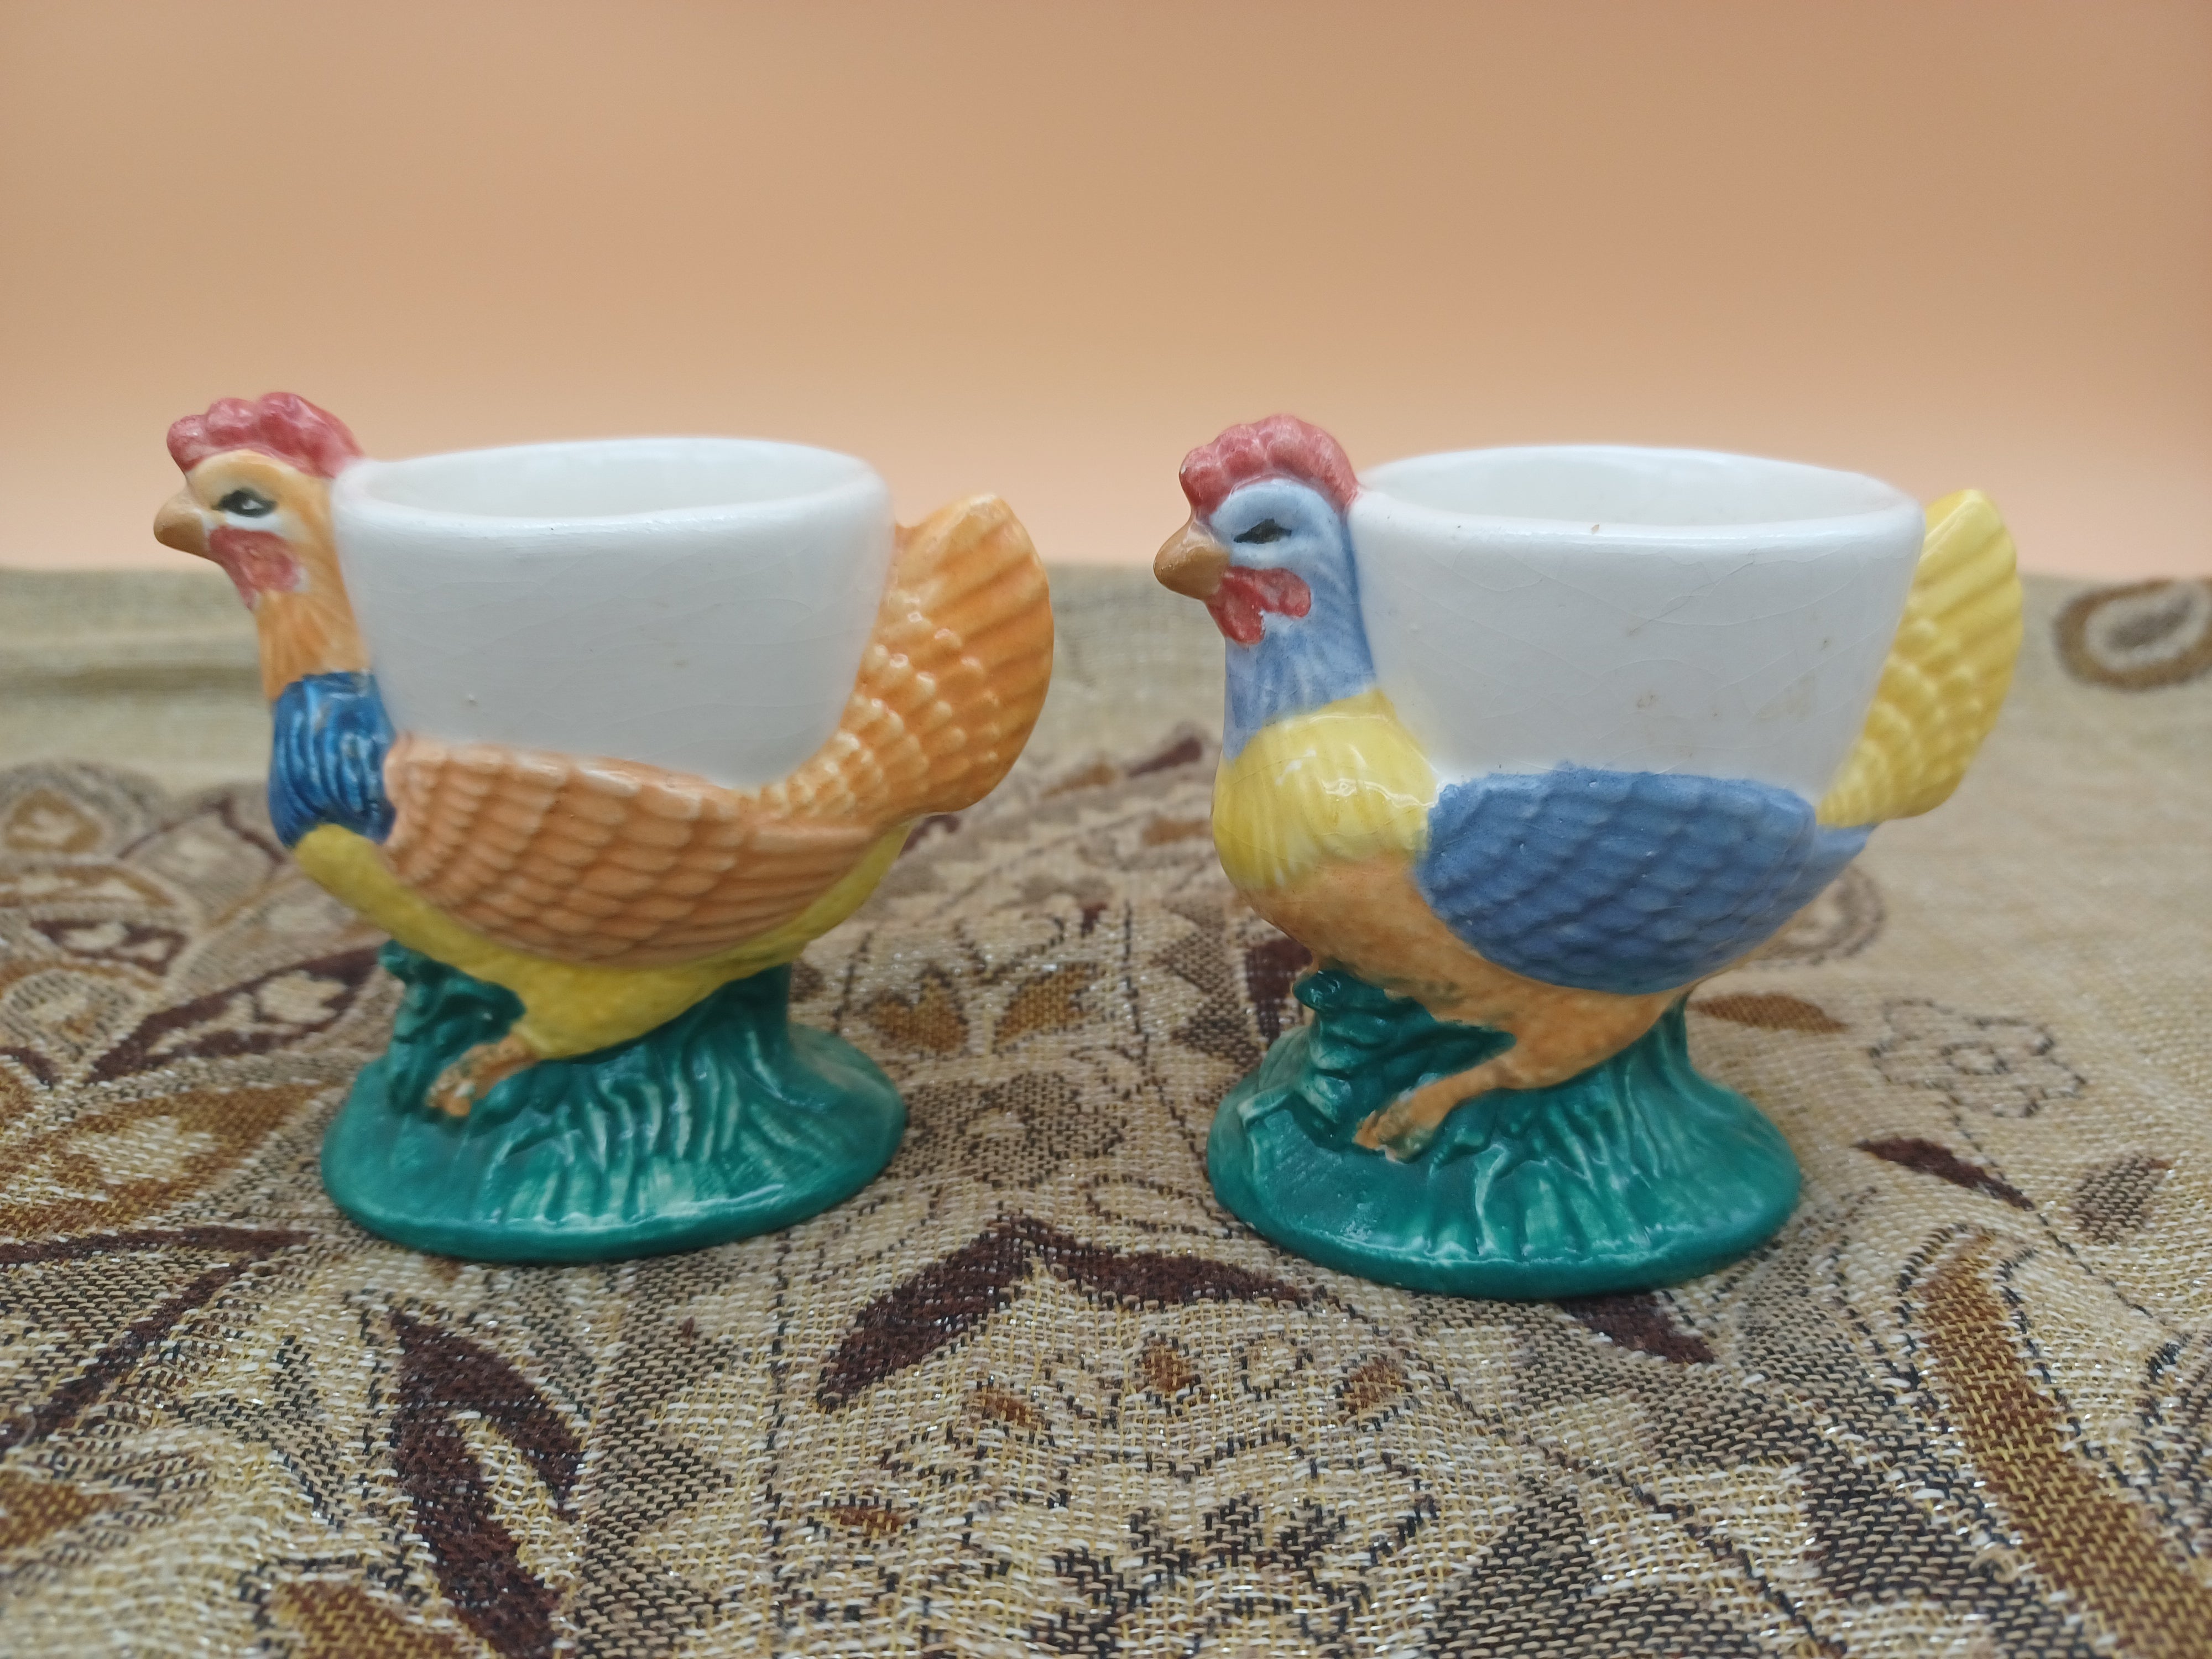 A Pair of Single White Porcelain Egg Cups With Chickens, Farmhouse Decor,  Country Kitchen, Holiday Brunch 